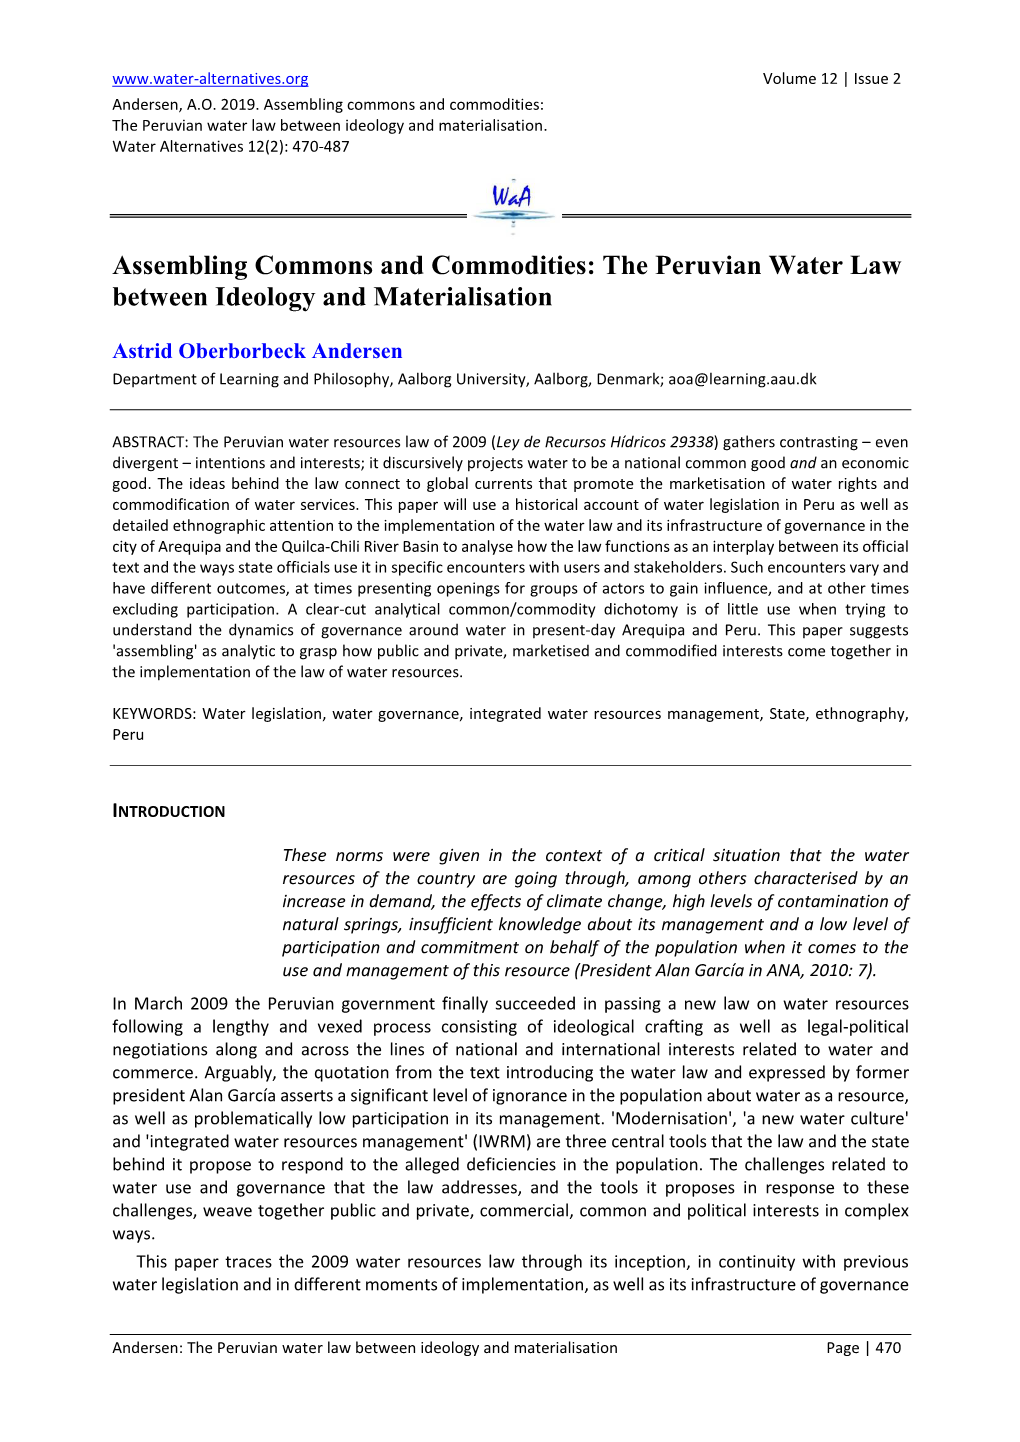 The Peruvian Water Law Between Ideology and Materialisation